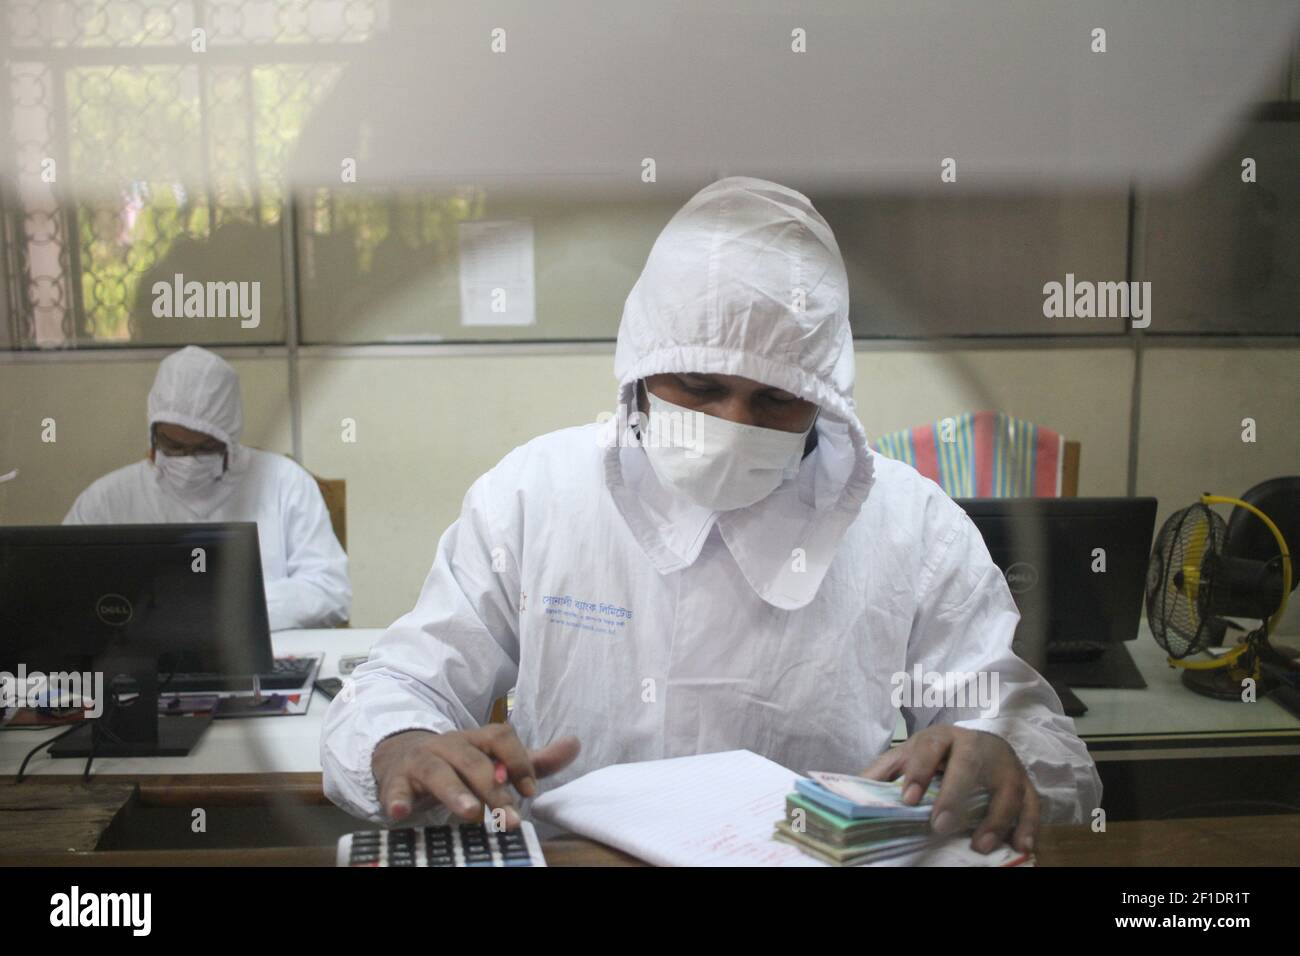 Bank employee wearing PPE (Personal protective equipment) amid fears of the spread the Coronavirus disease (COVID-19) in Dhaka, Bangladesh. Total 48 people have been infected by Covid-19 in Bangladesh, of whom 5 died said IEDCR official. (Photo by Md Abu Sufian Jewel/Pacific Press/Sipa USA) Stock Photo